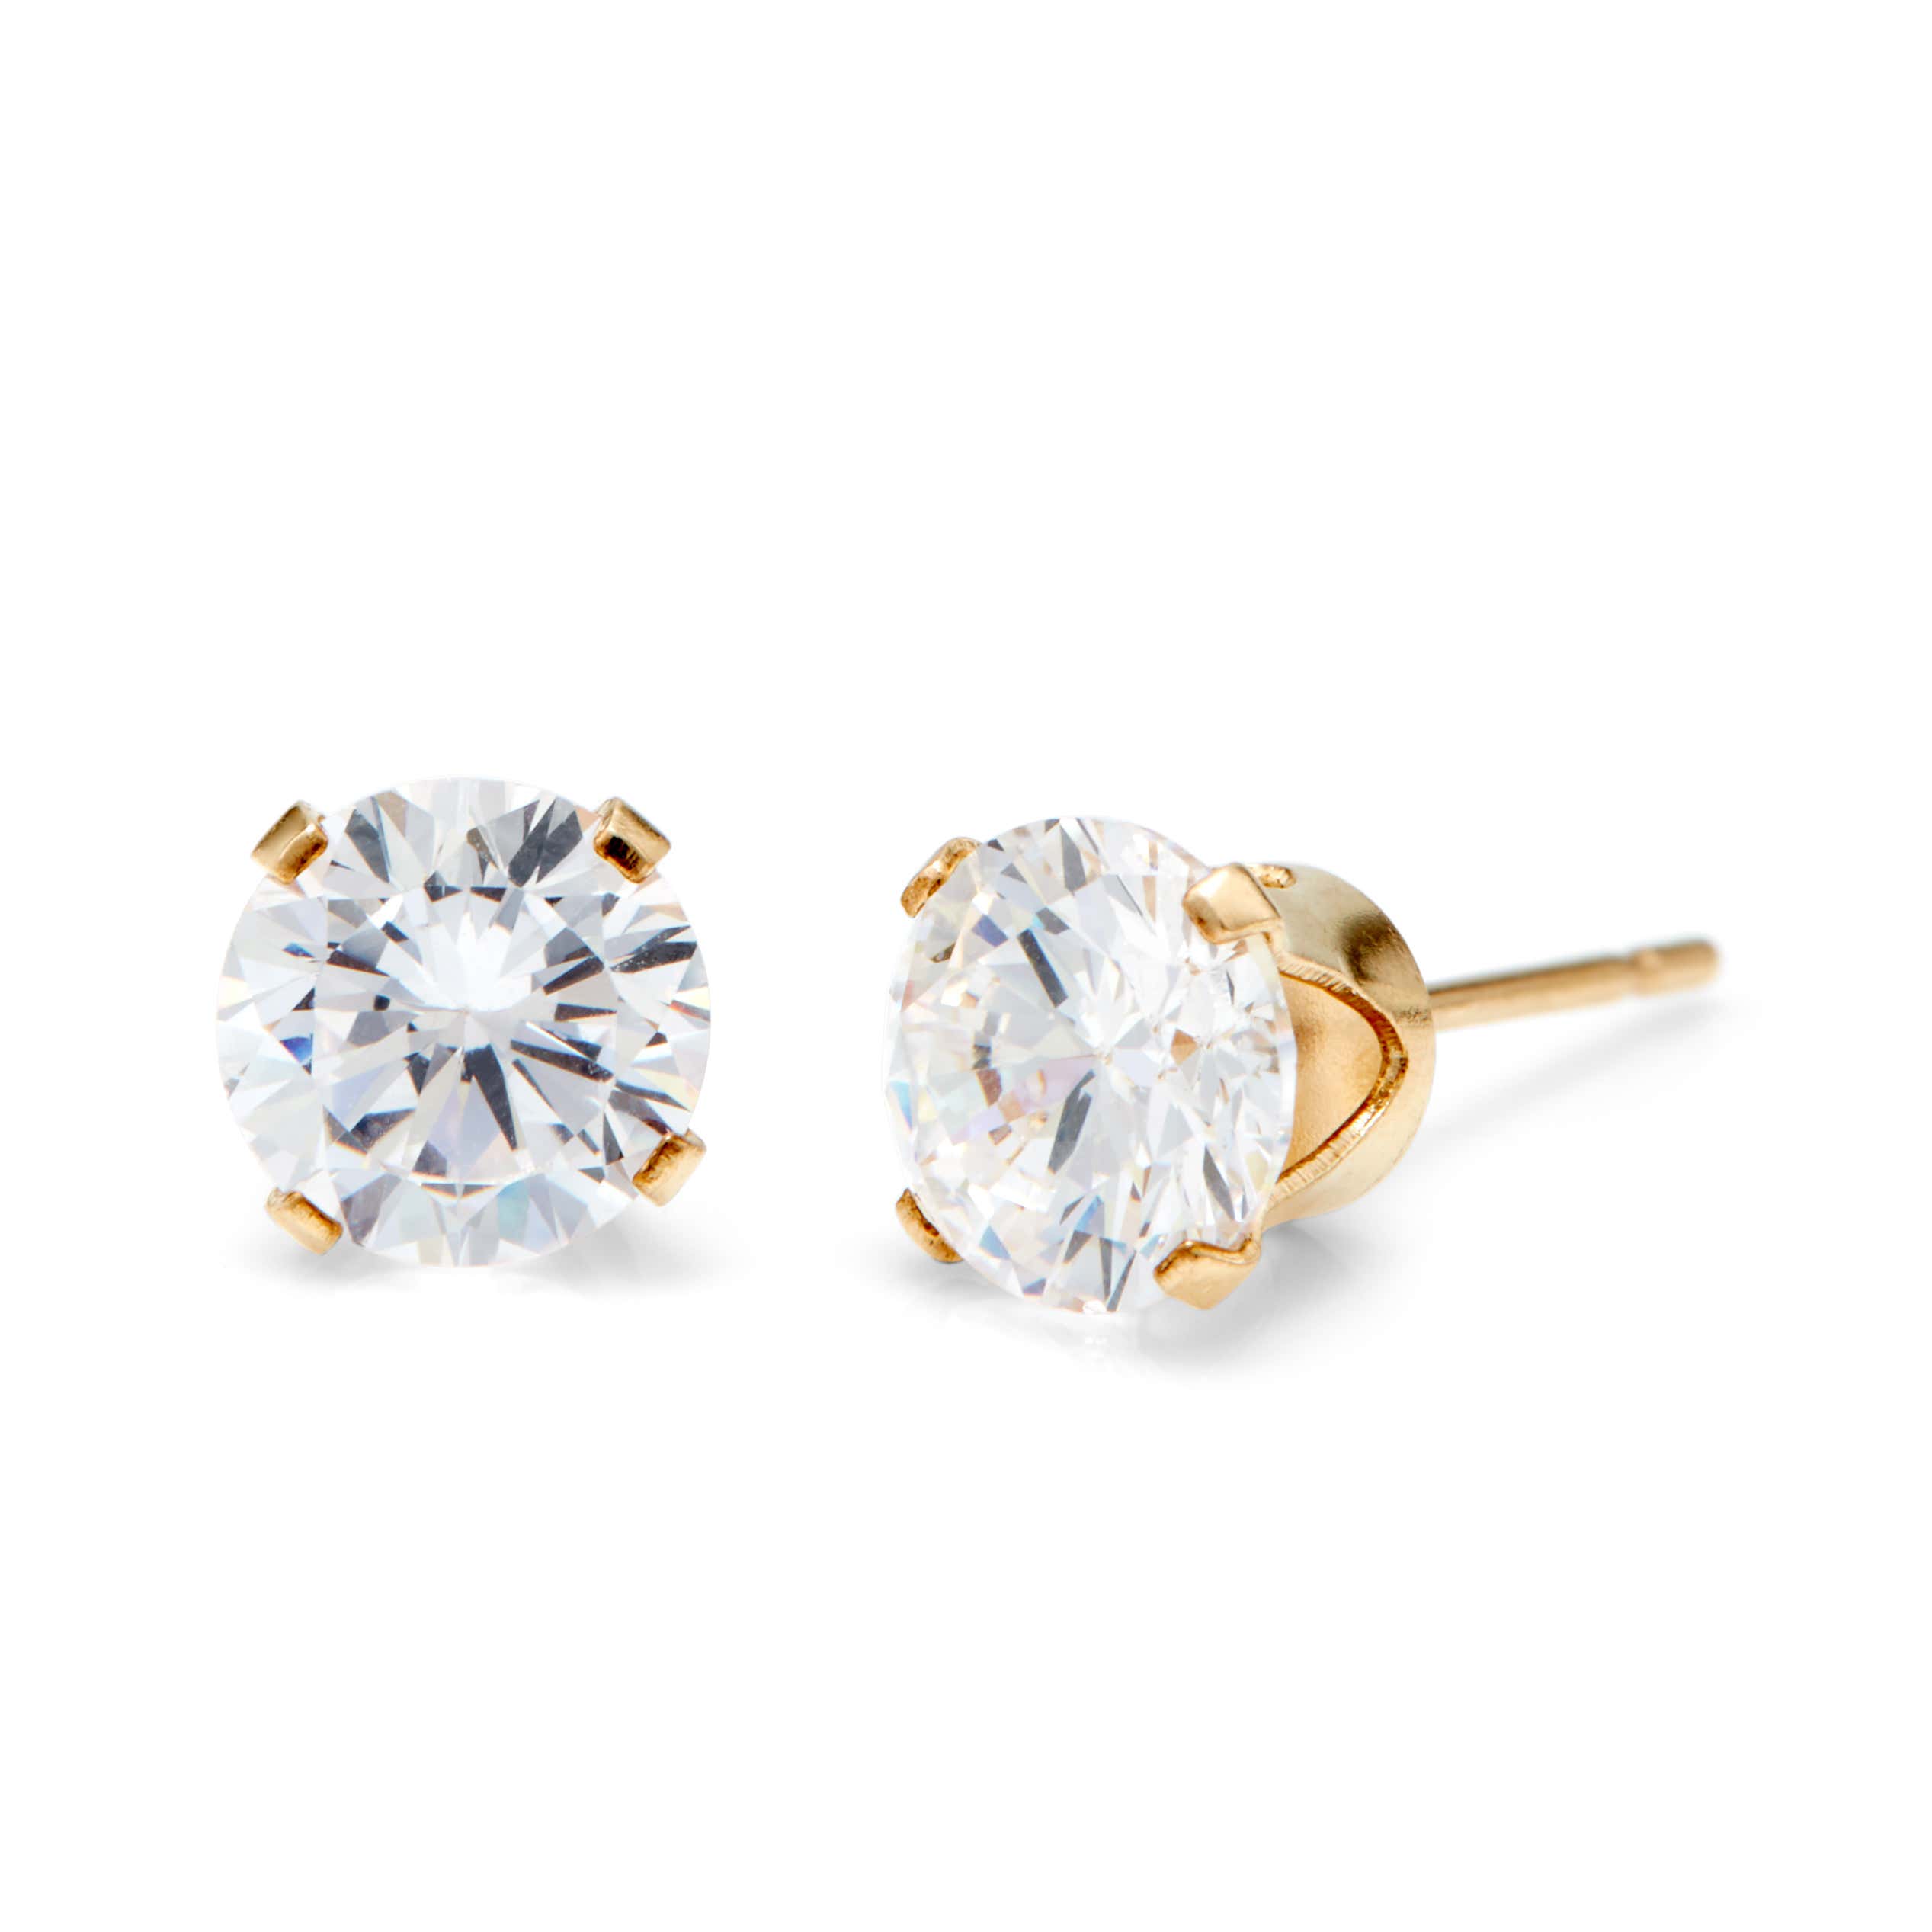 14K Gold Filled Round Diamond CZ 6mm Stud Earrings | Eve's Addiction